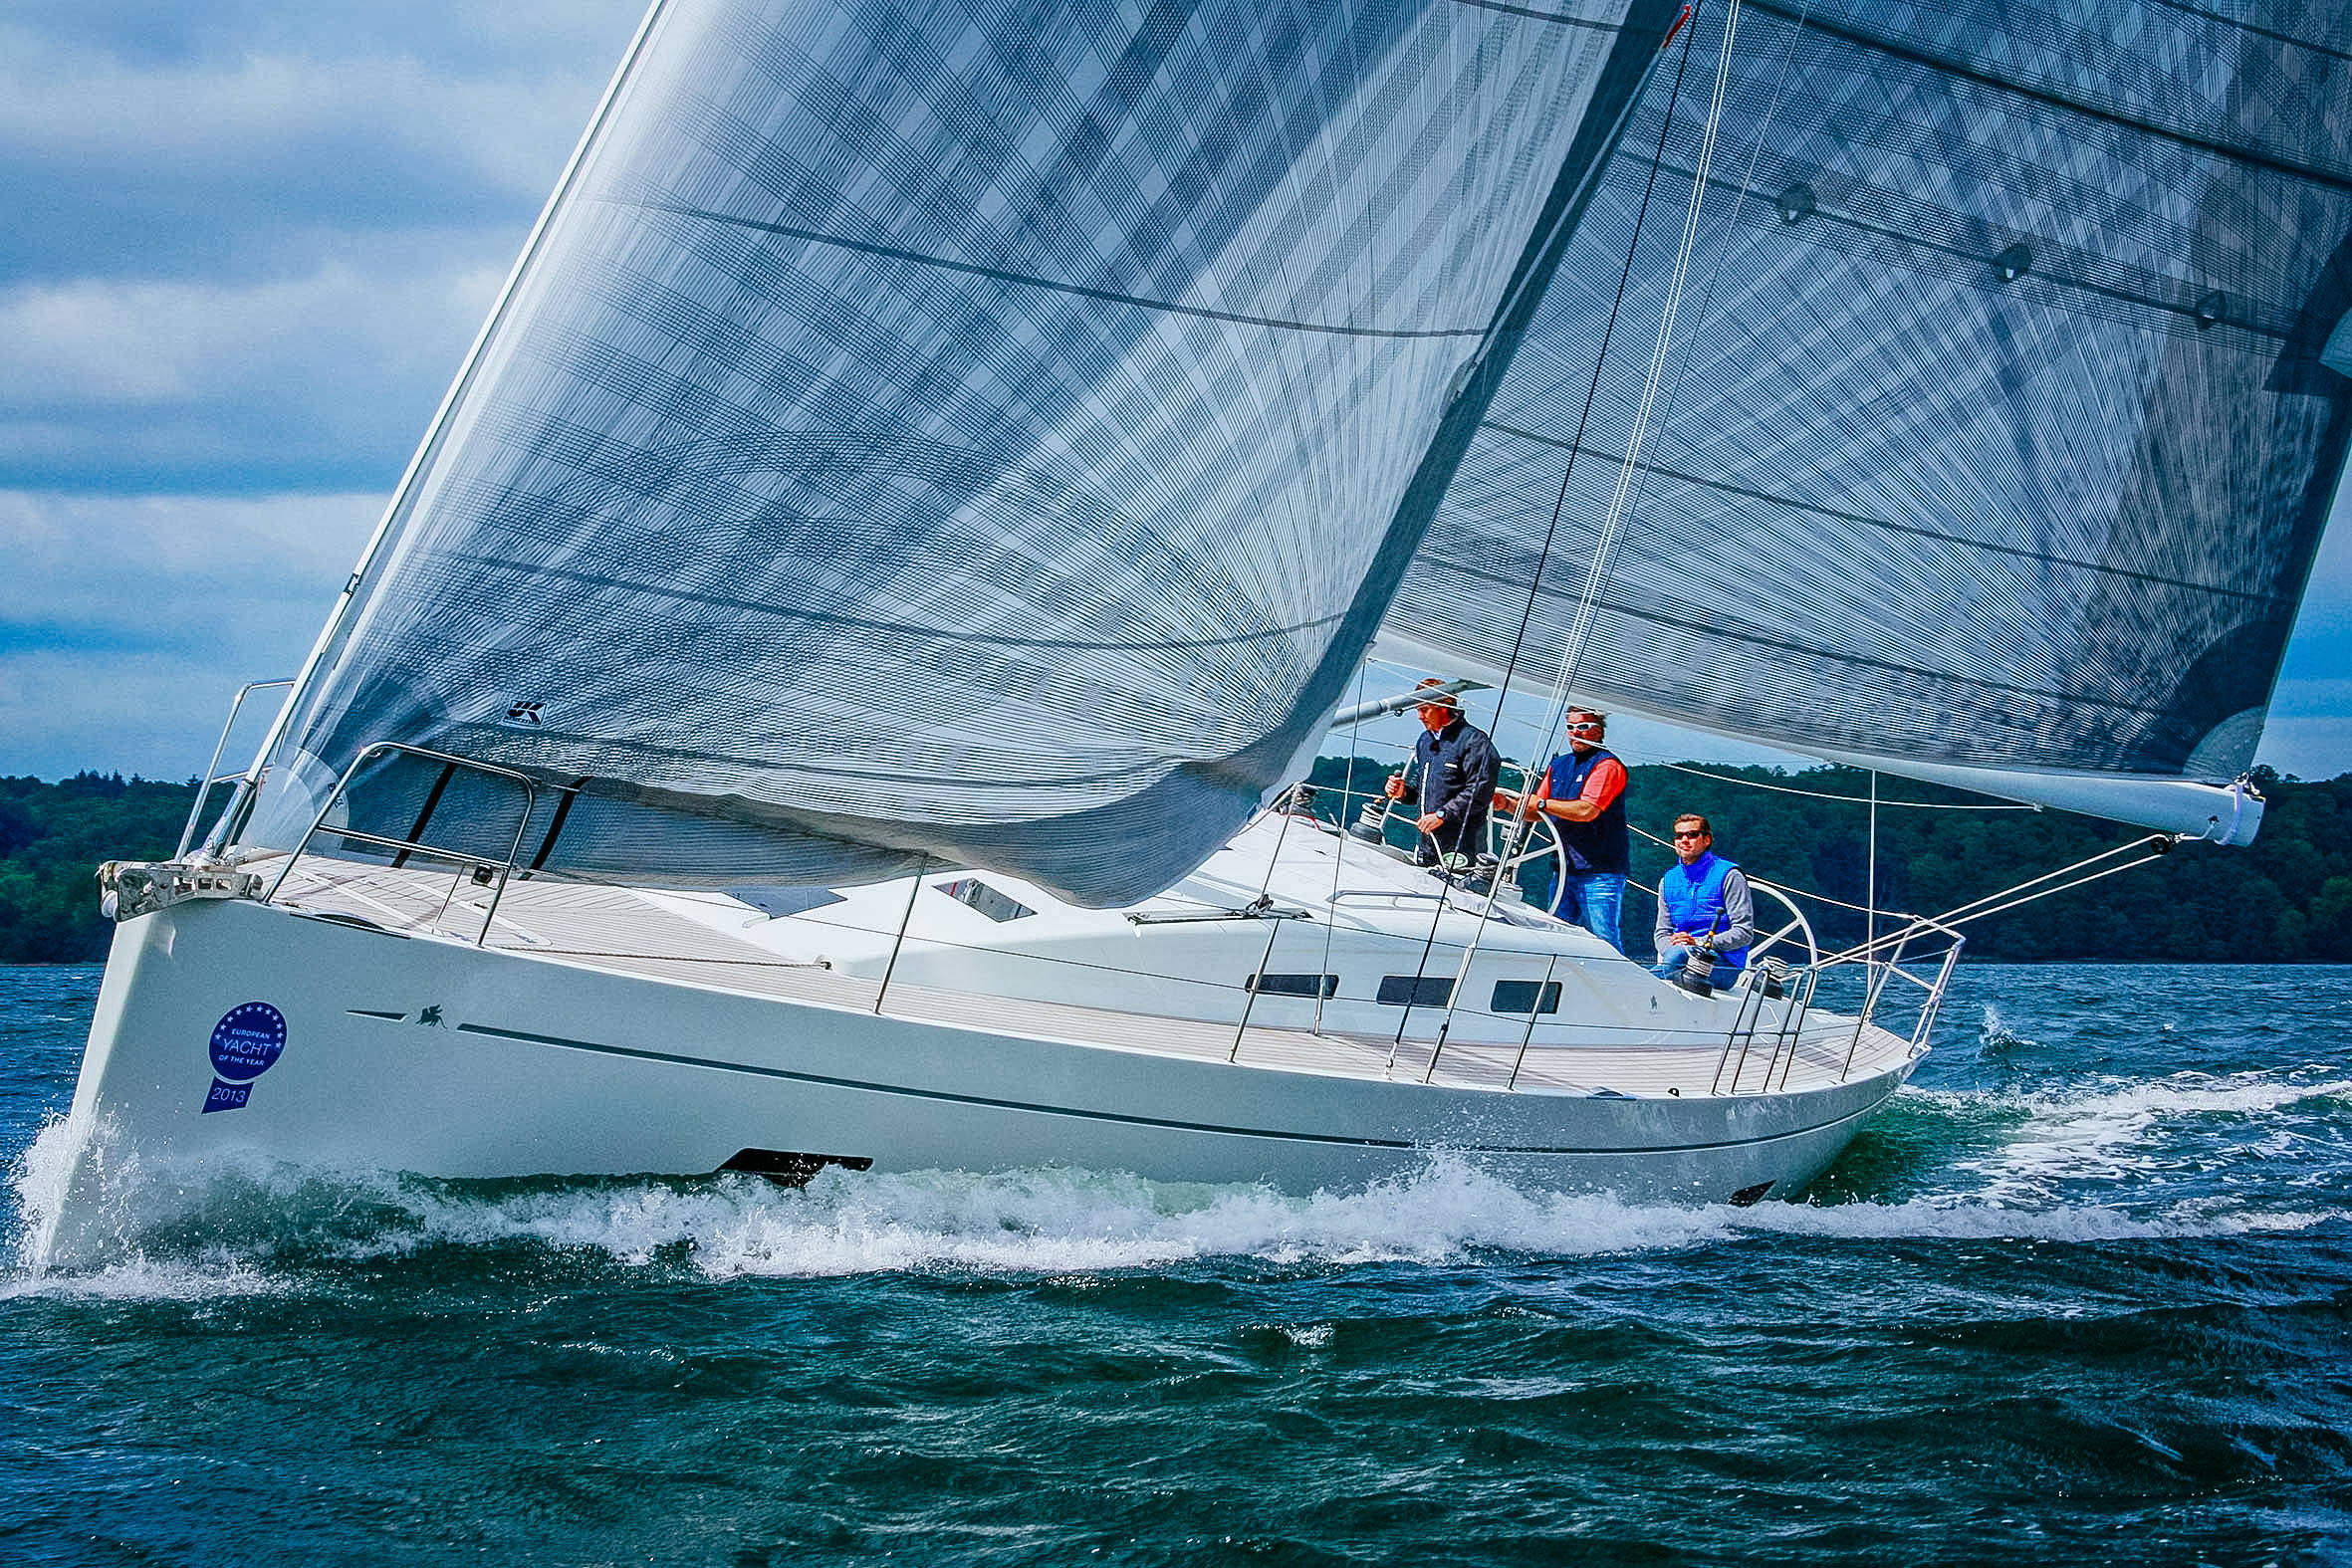 An Italia 13.98 with X-Drive taffeta carbon cruising sails. Click to enlarge.